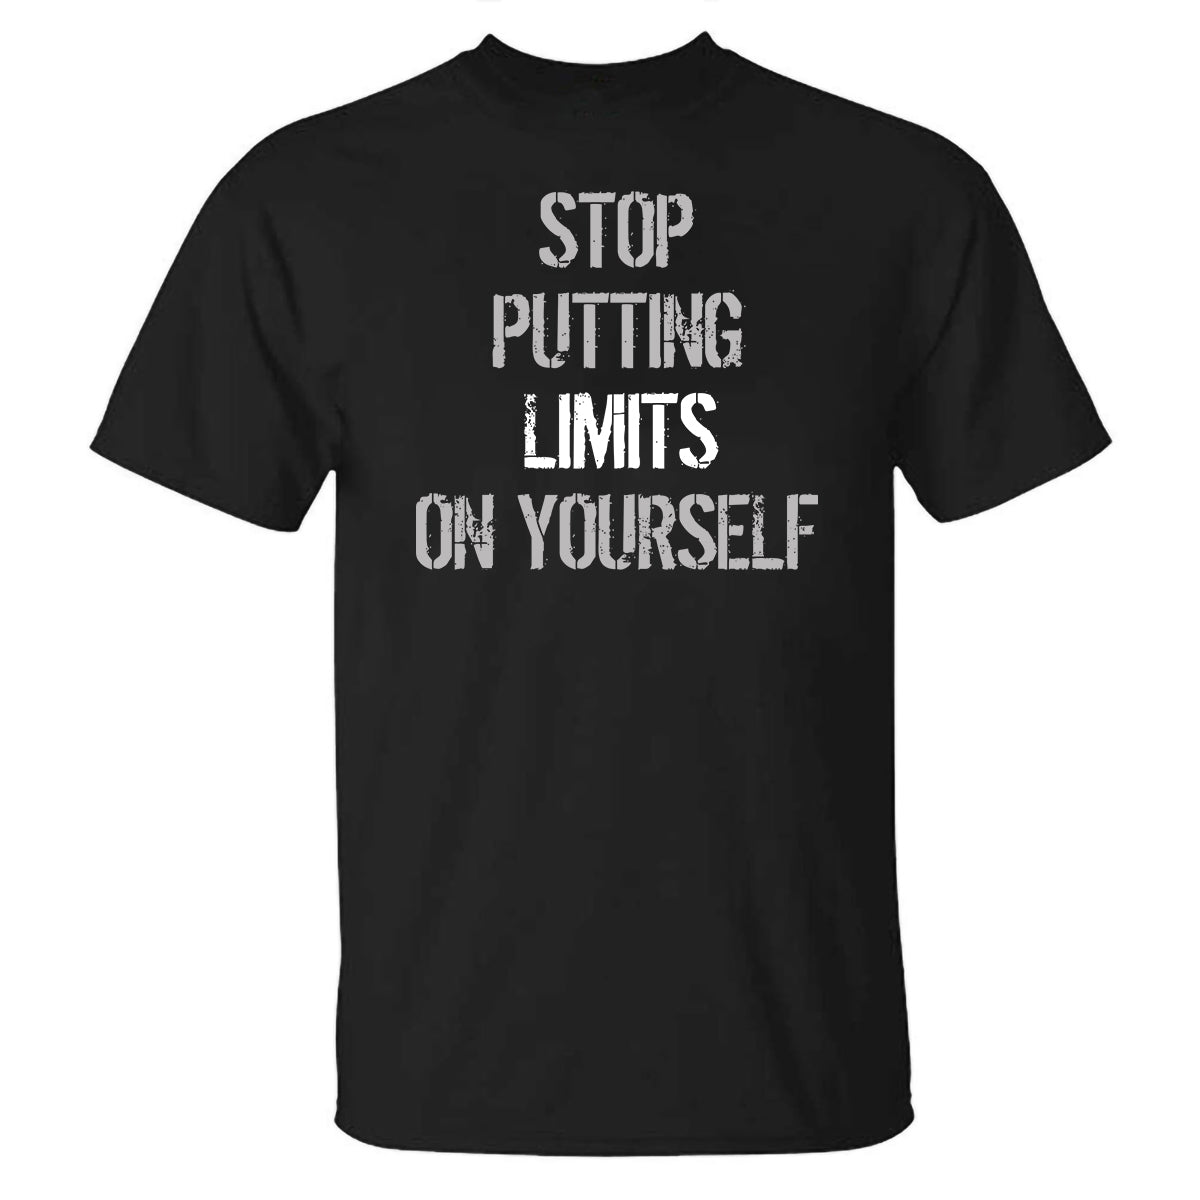 Stop Putting Limits On Yourself Printed T-shirt